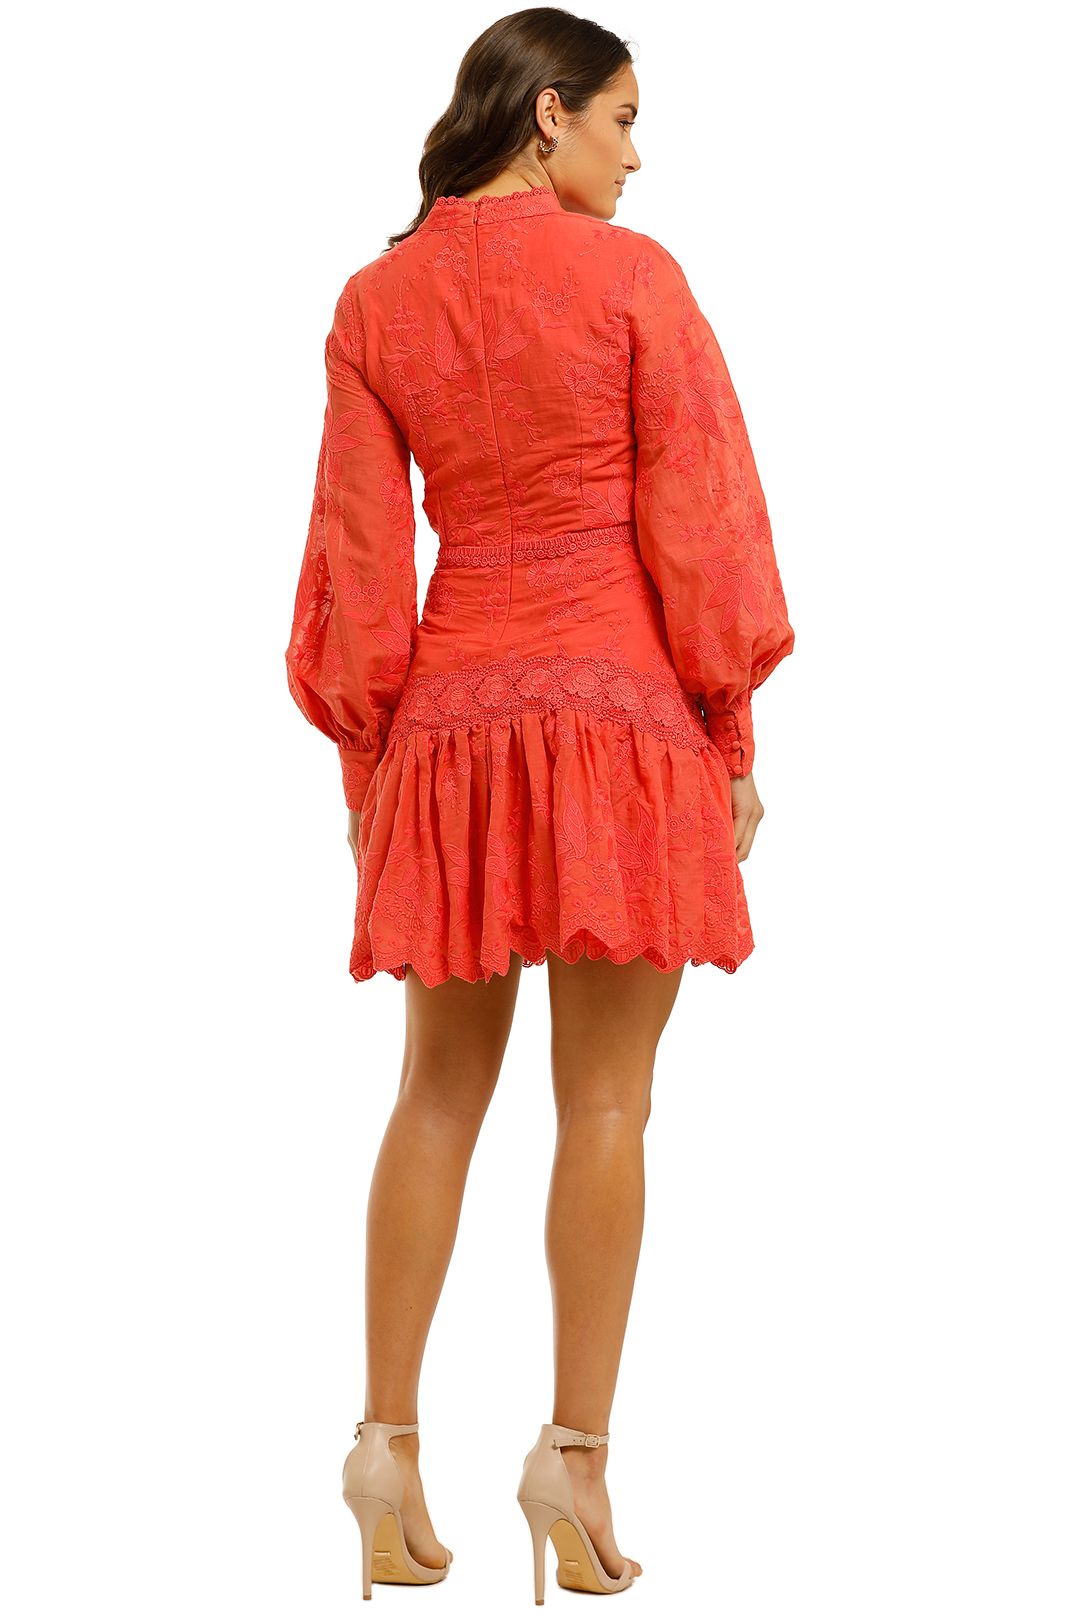 Ministry-of-Style-Daphne-Mini-Dress-Coral-Back